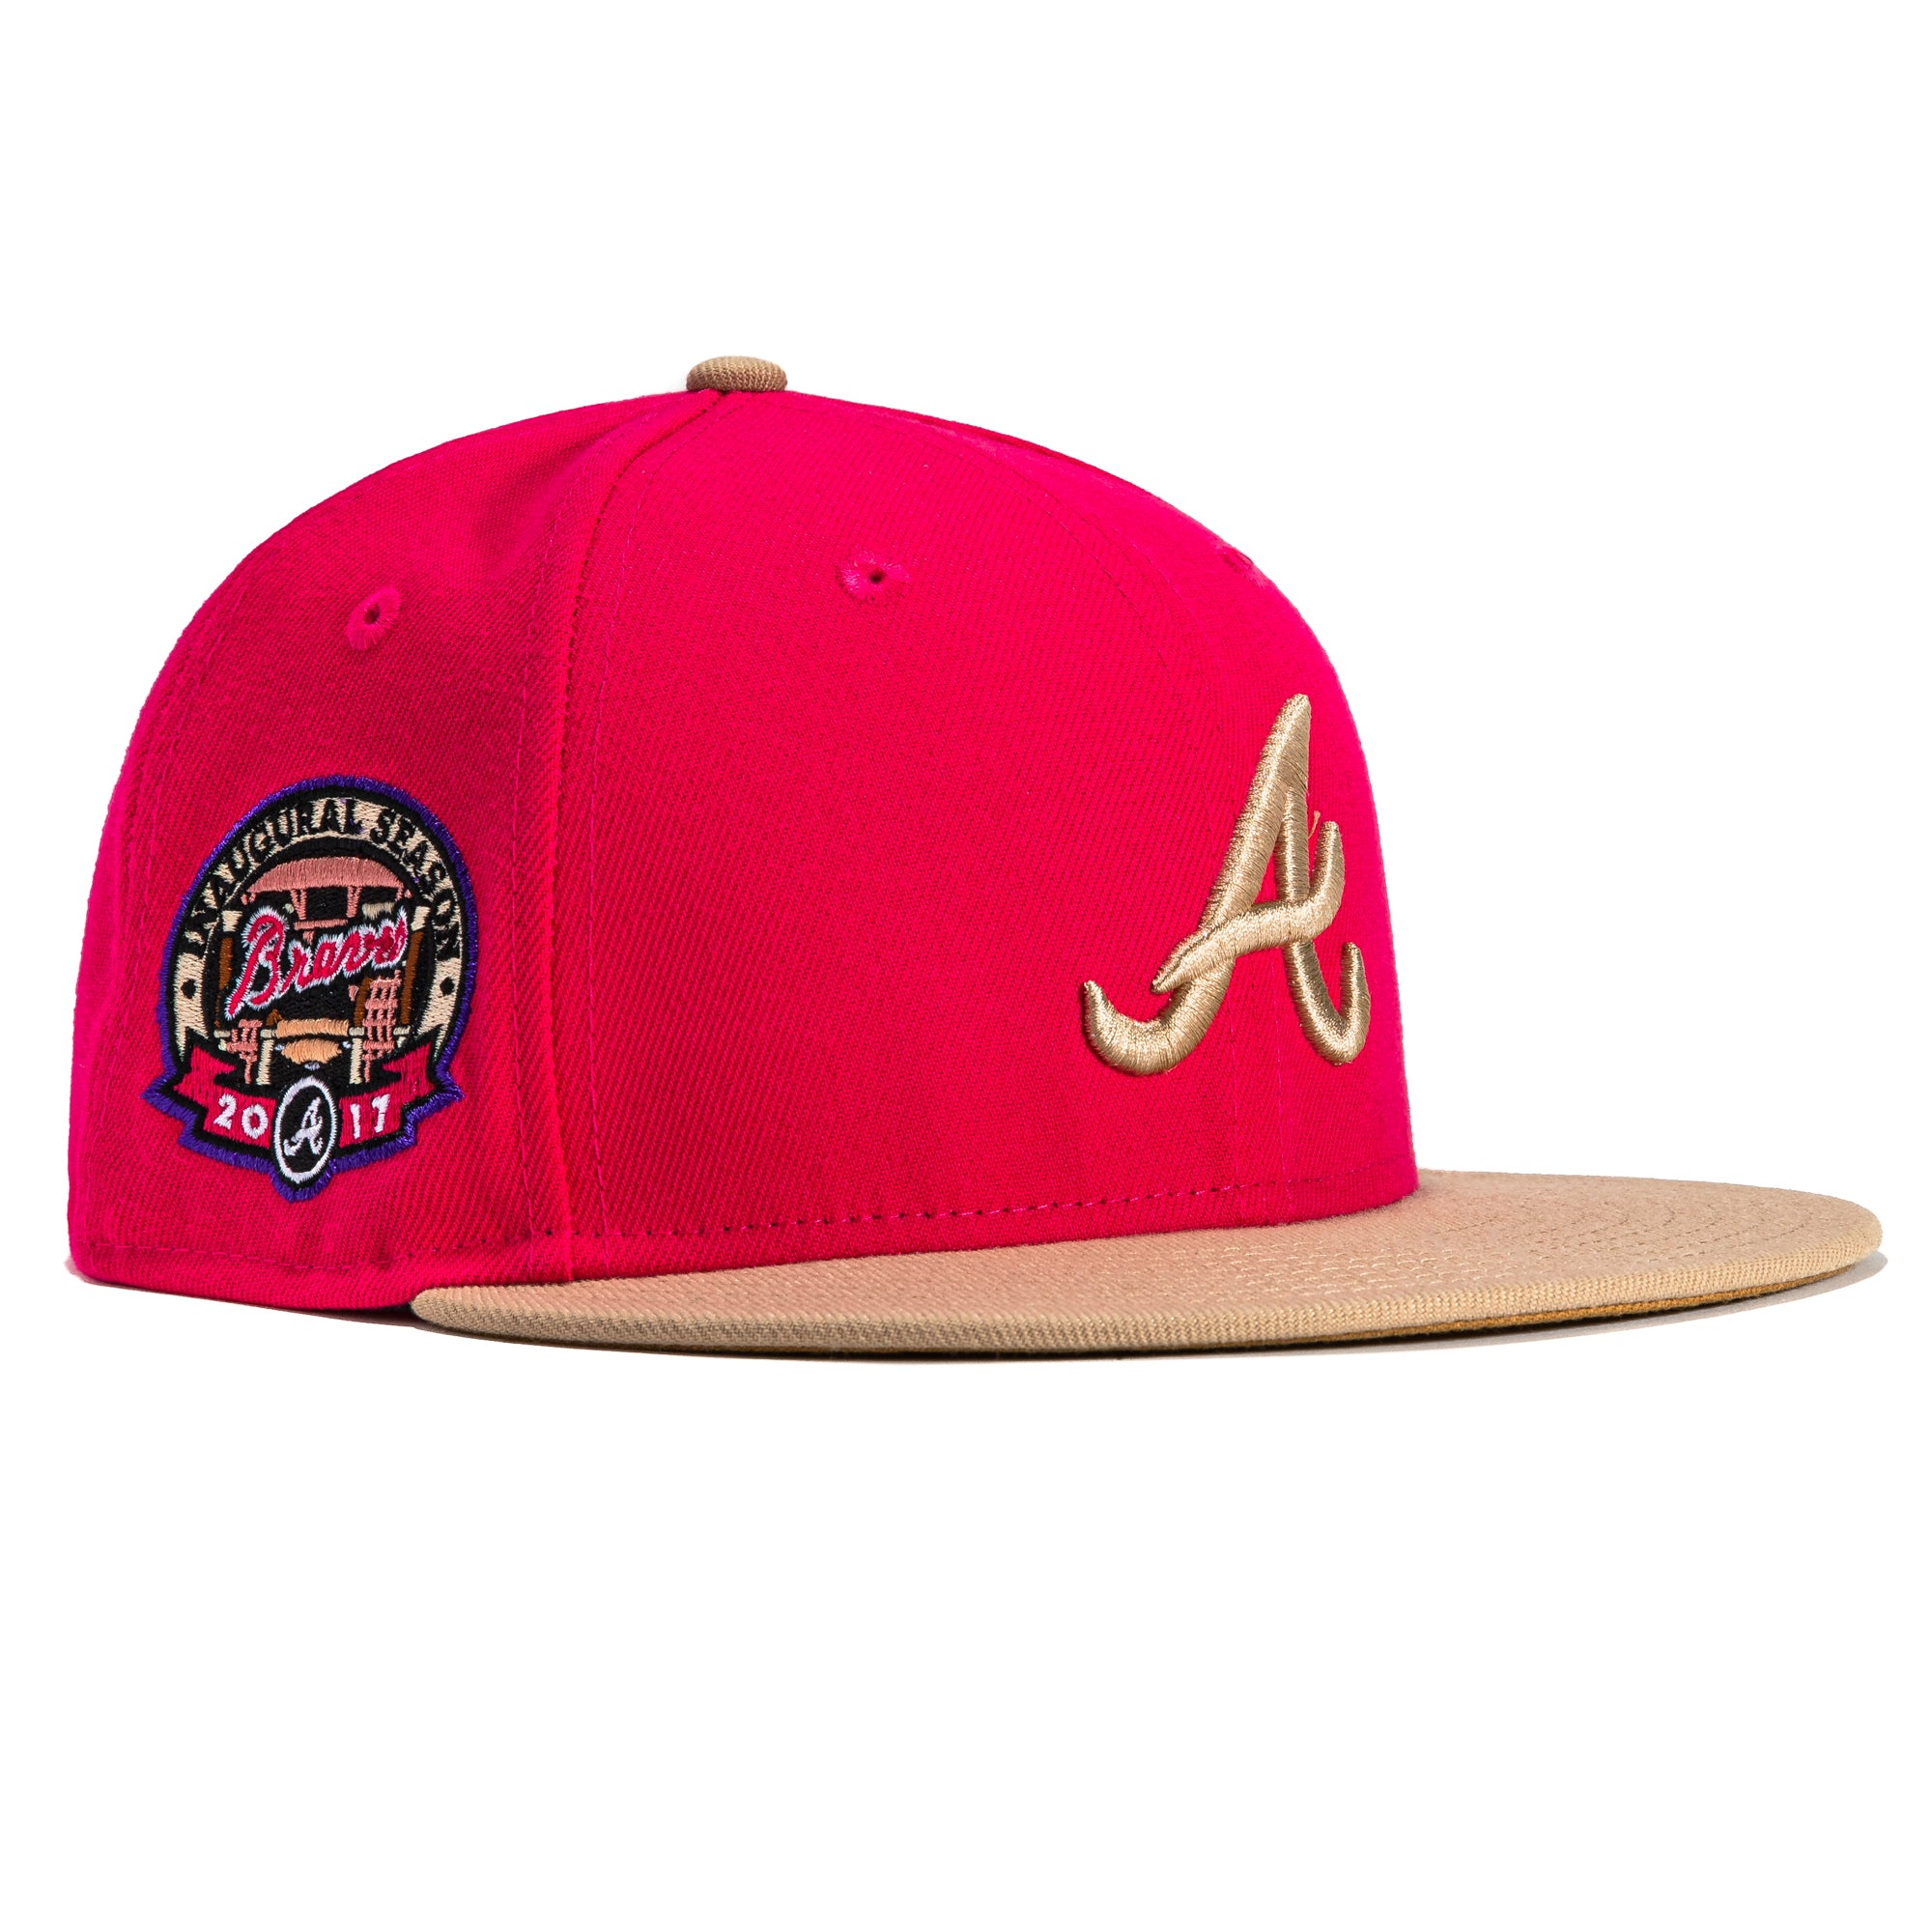 New Era Atlanta Braves Authentic Collection 59FIFTY Fitted Hat 7 1/2 / Navy/Red